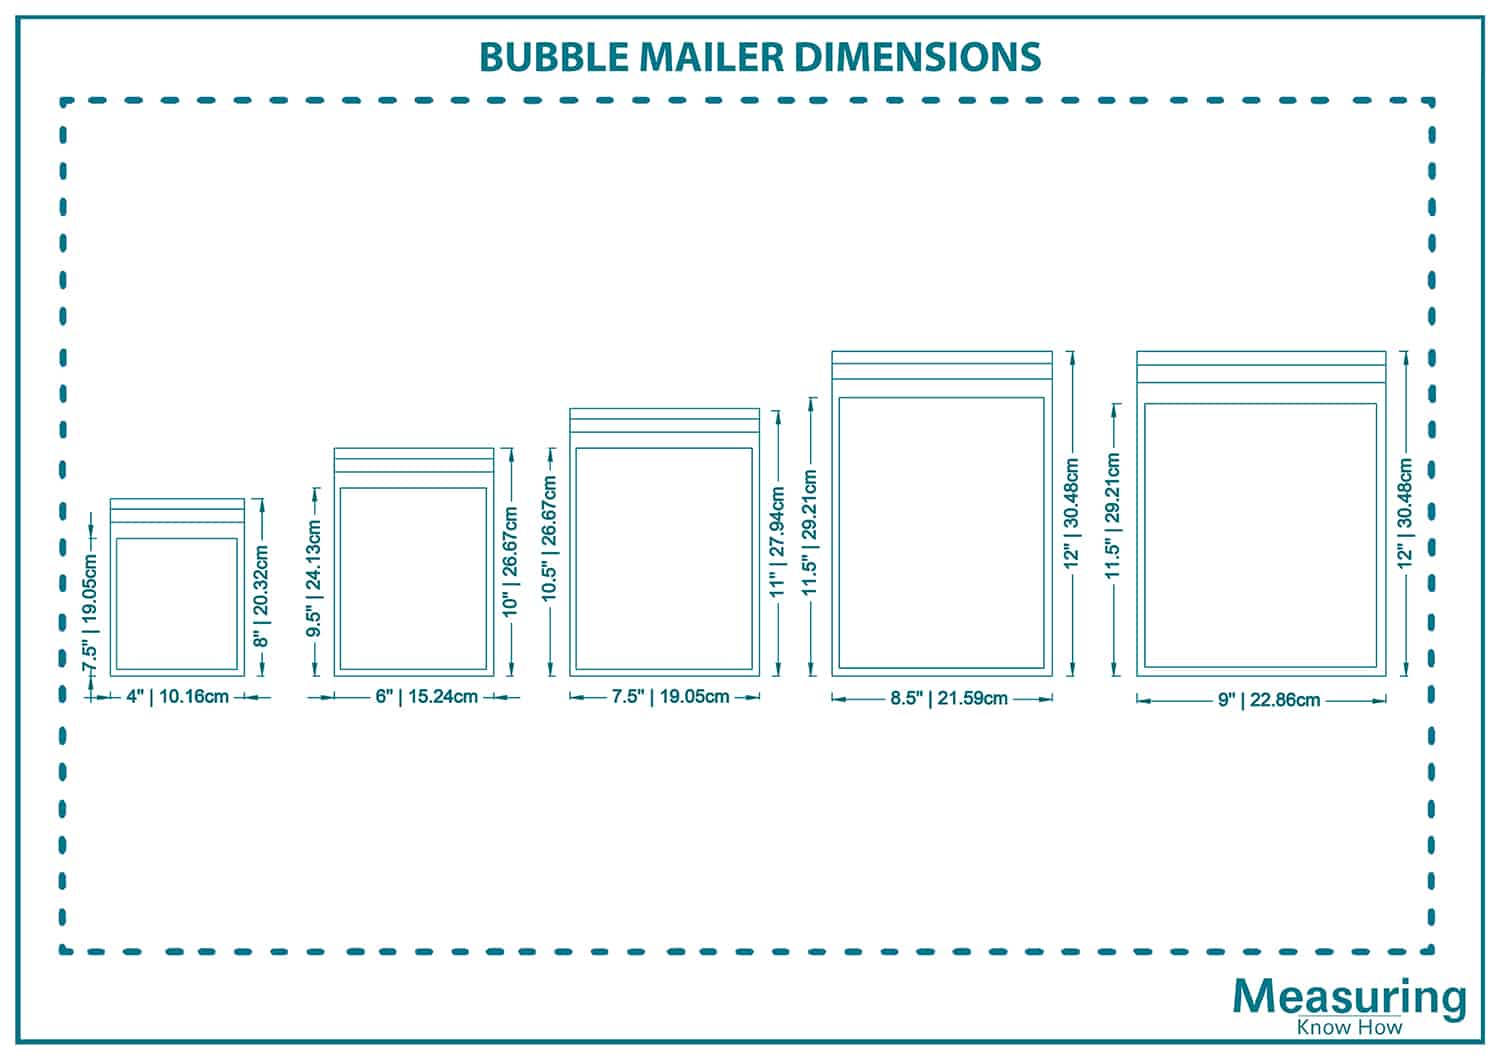 What Are the Bubble Mailer Dimensions? MeasuringKnowHow